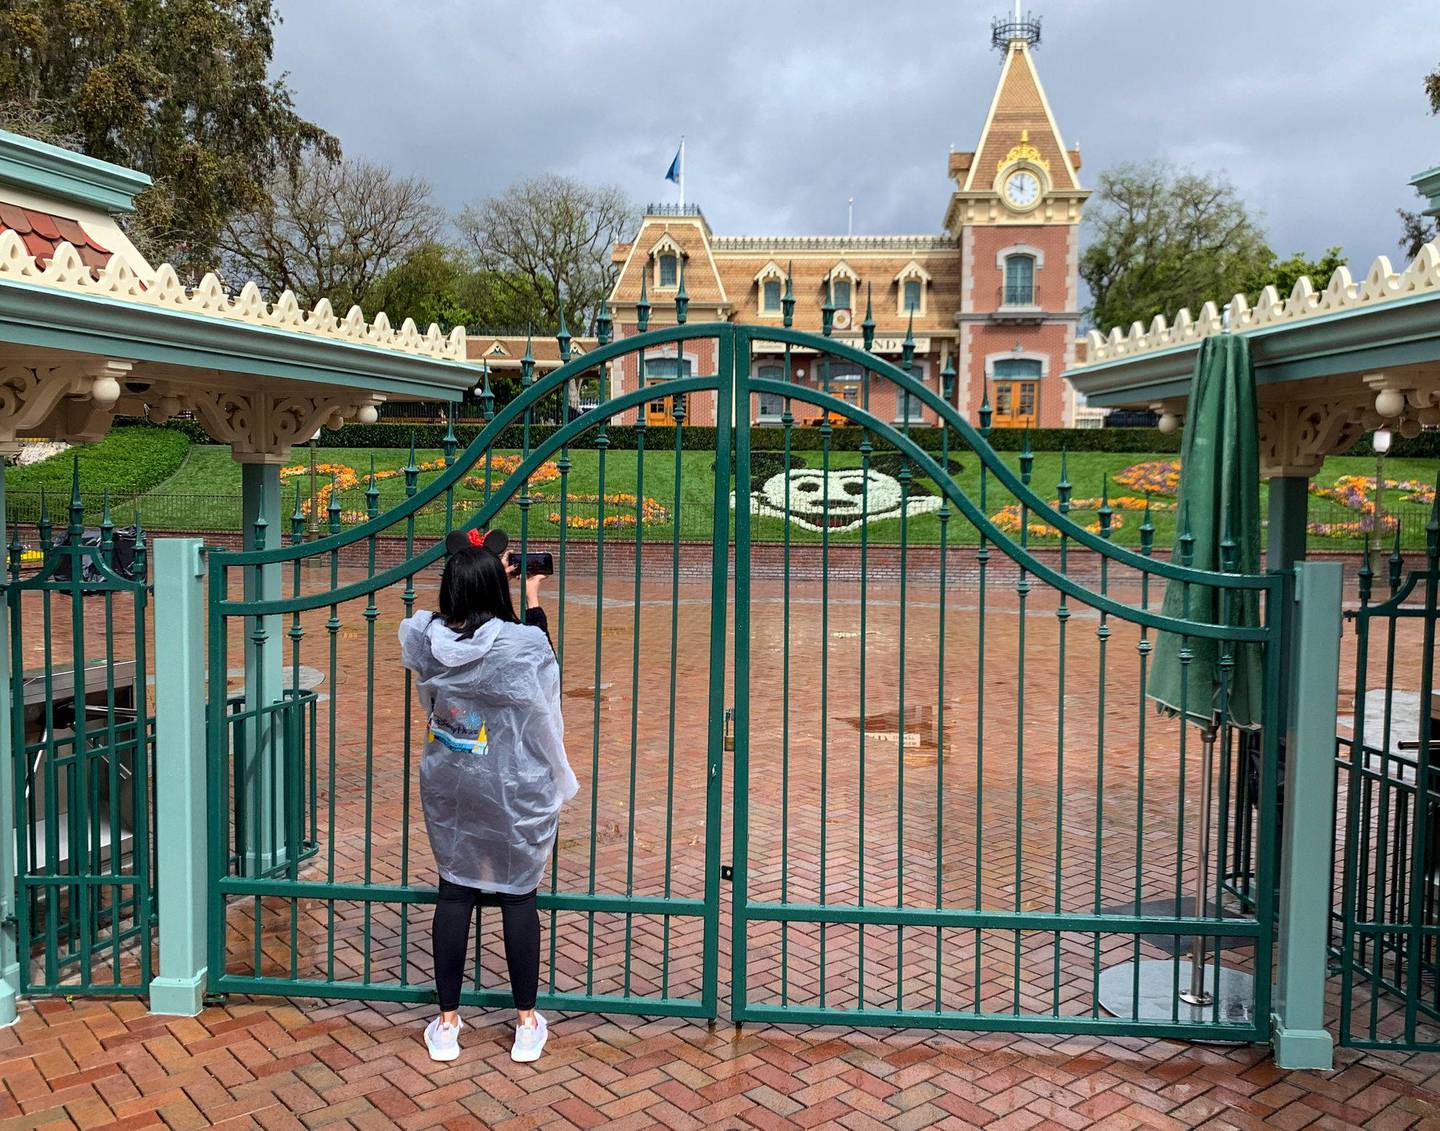 A visitor to the Disneyland Resort takes a picture through a locked gate at the entrance to Disneyland in Anaheim, Calif., on Monday, March 16, 2020.  Disneyland Resort is shutting down due to the new coronavirus outbreak. For most people, the new coronavirus causes only mild or moderate symptoms, such as fever and cough. For some, especially older adults and people with existing health problems, it can cause more severe illness, including pneumonia. The vast majority of people recover. (Jeff Gritchen/The Orange County Register via AP)